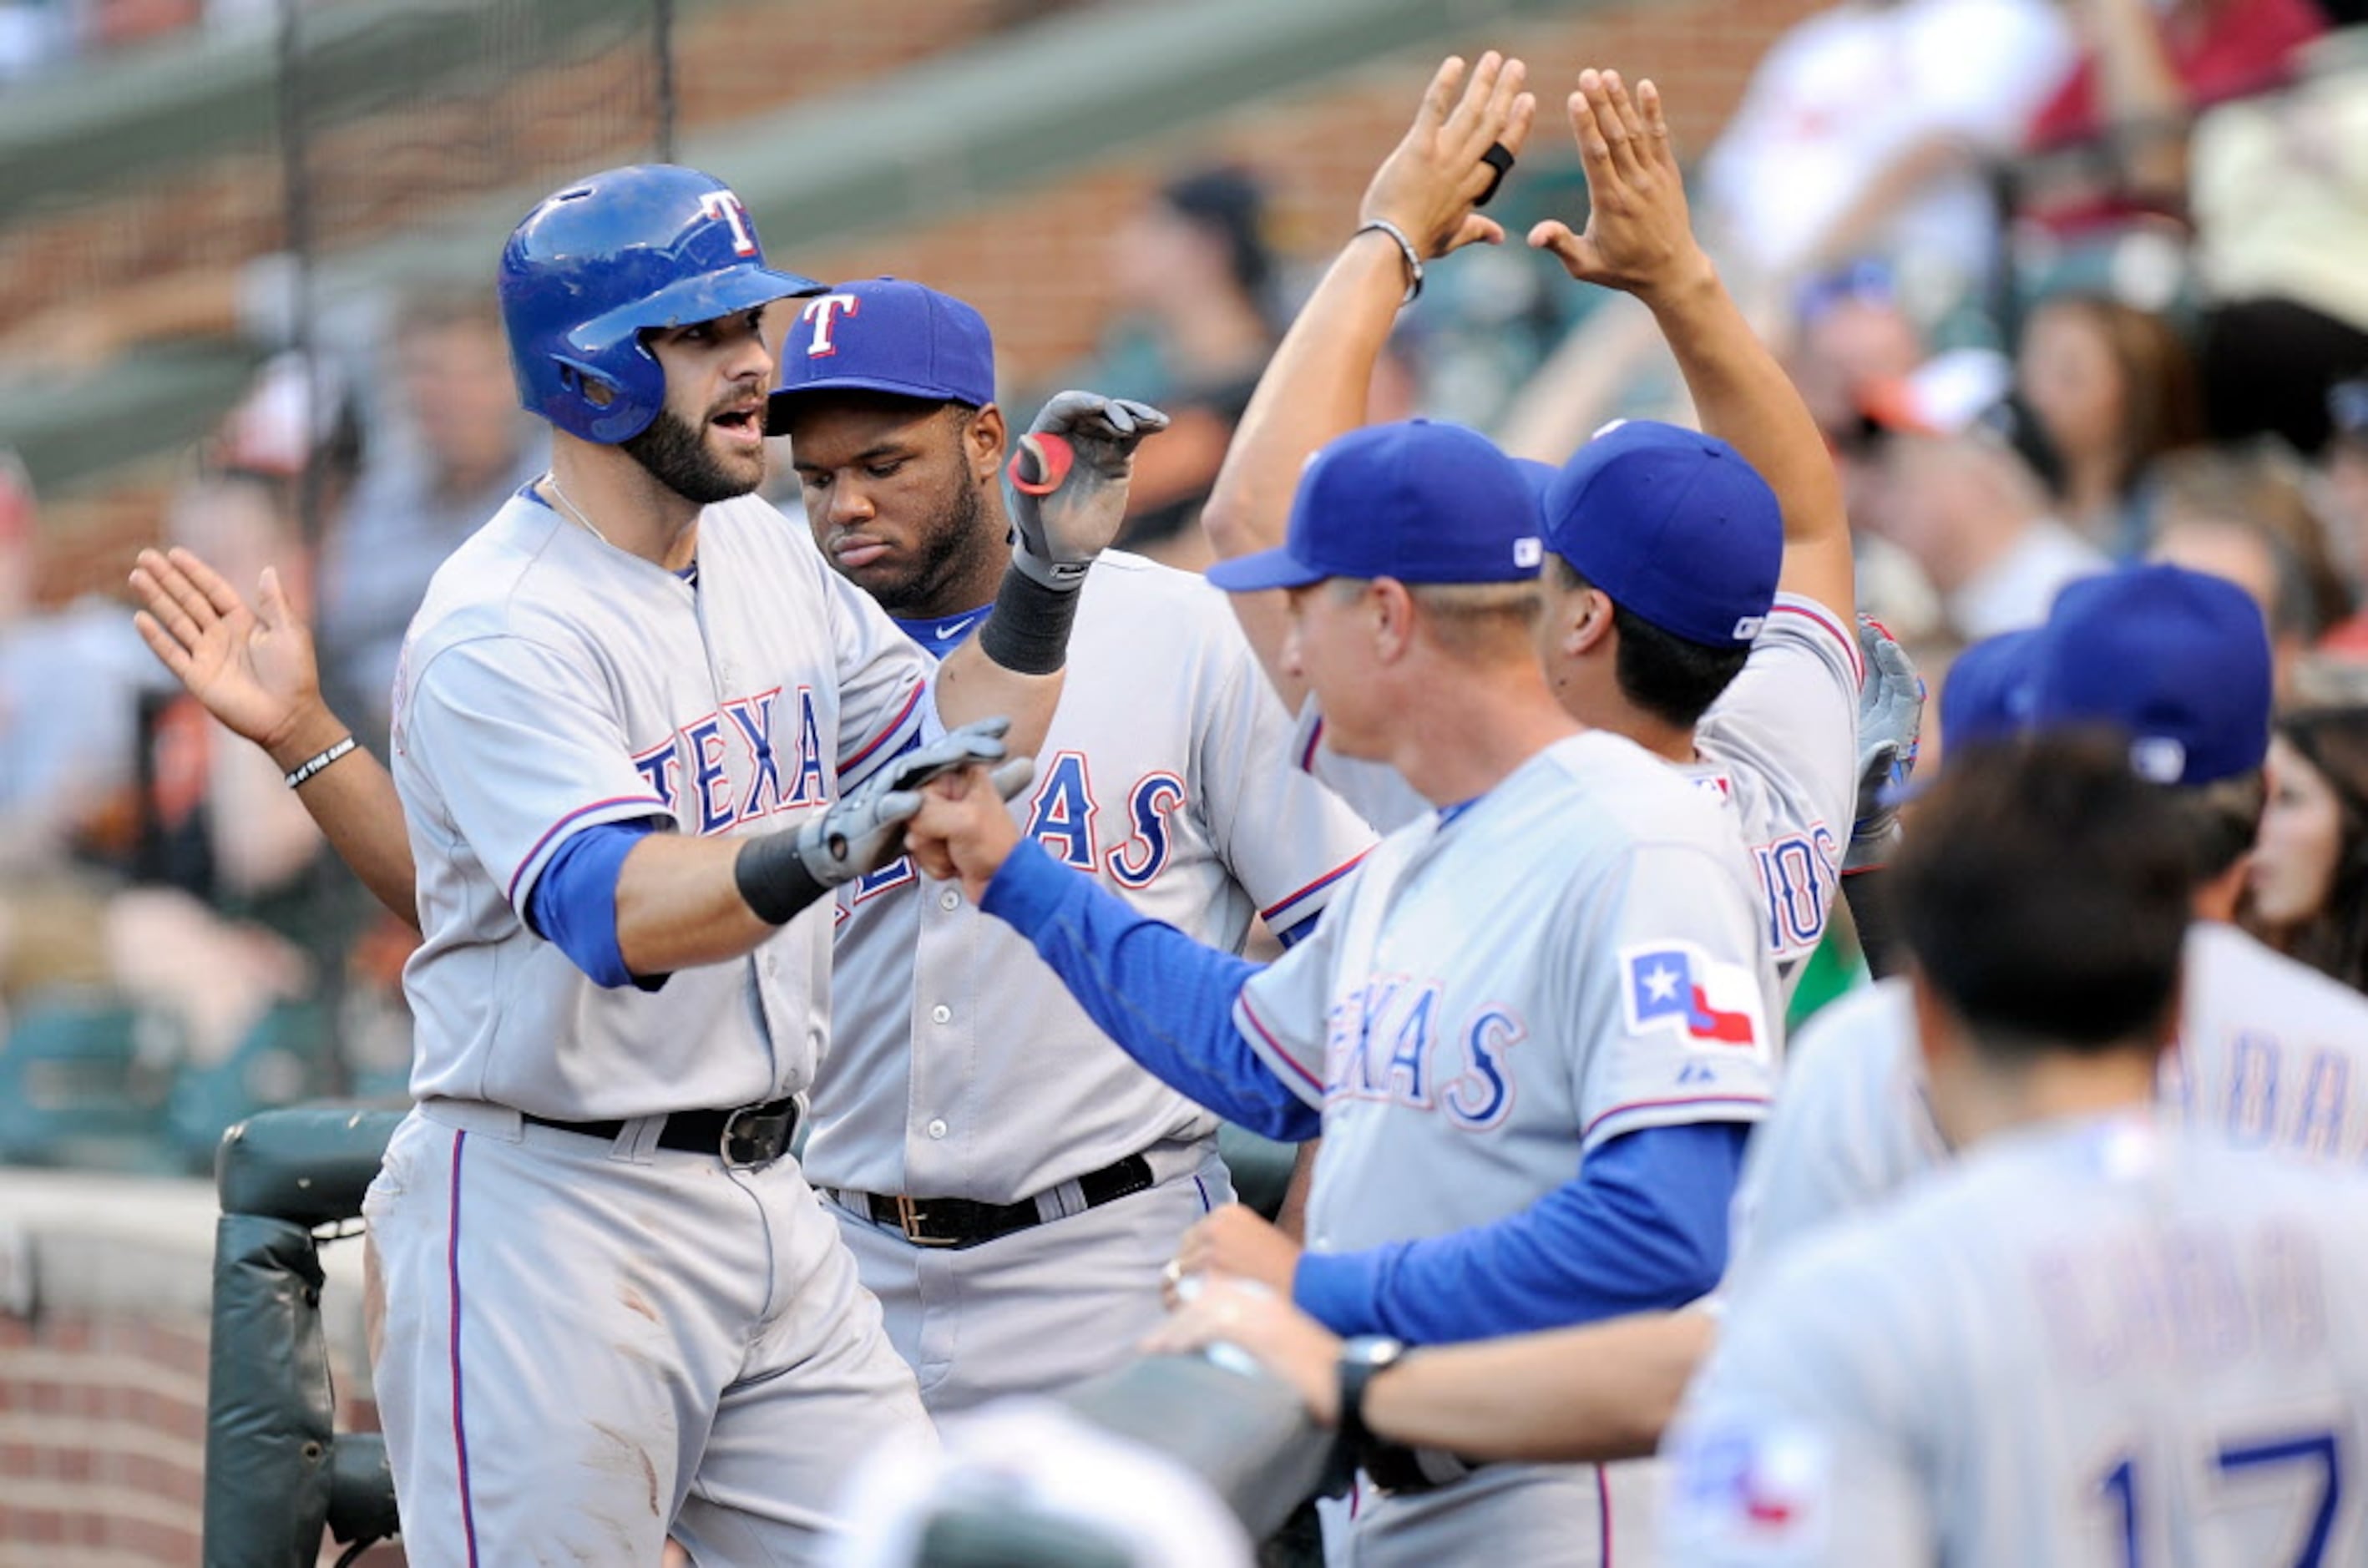 Nine stats that explain Rangers' first half, including a not-so-great .381